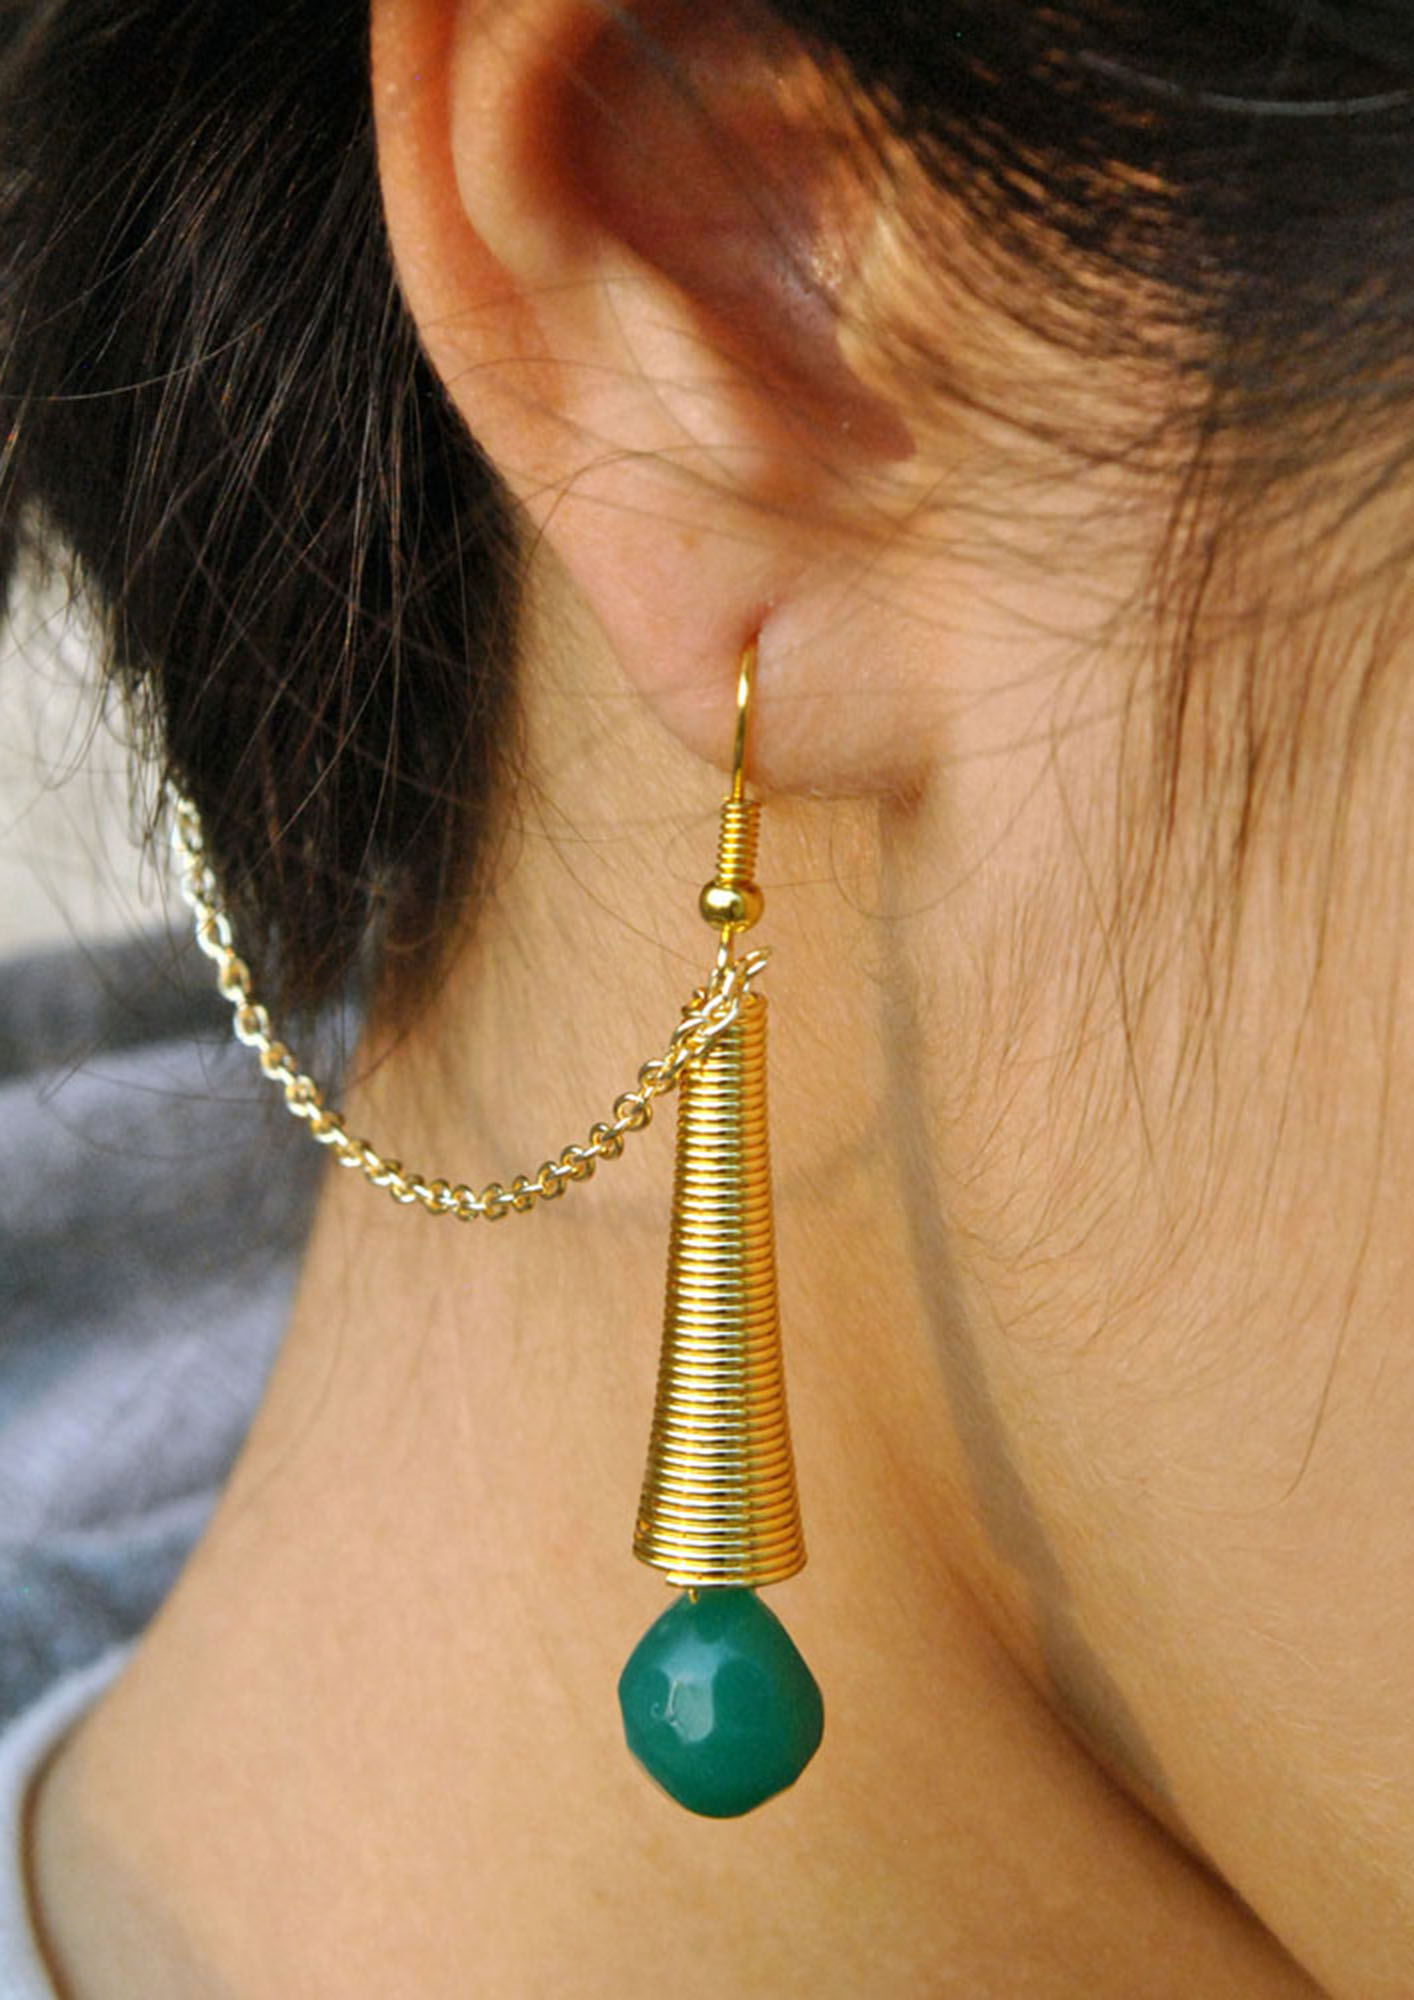 Green Dangling Earring With Hair Chain